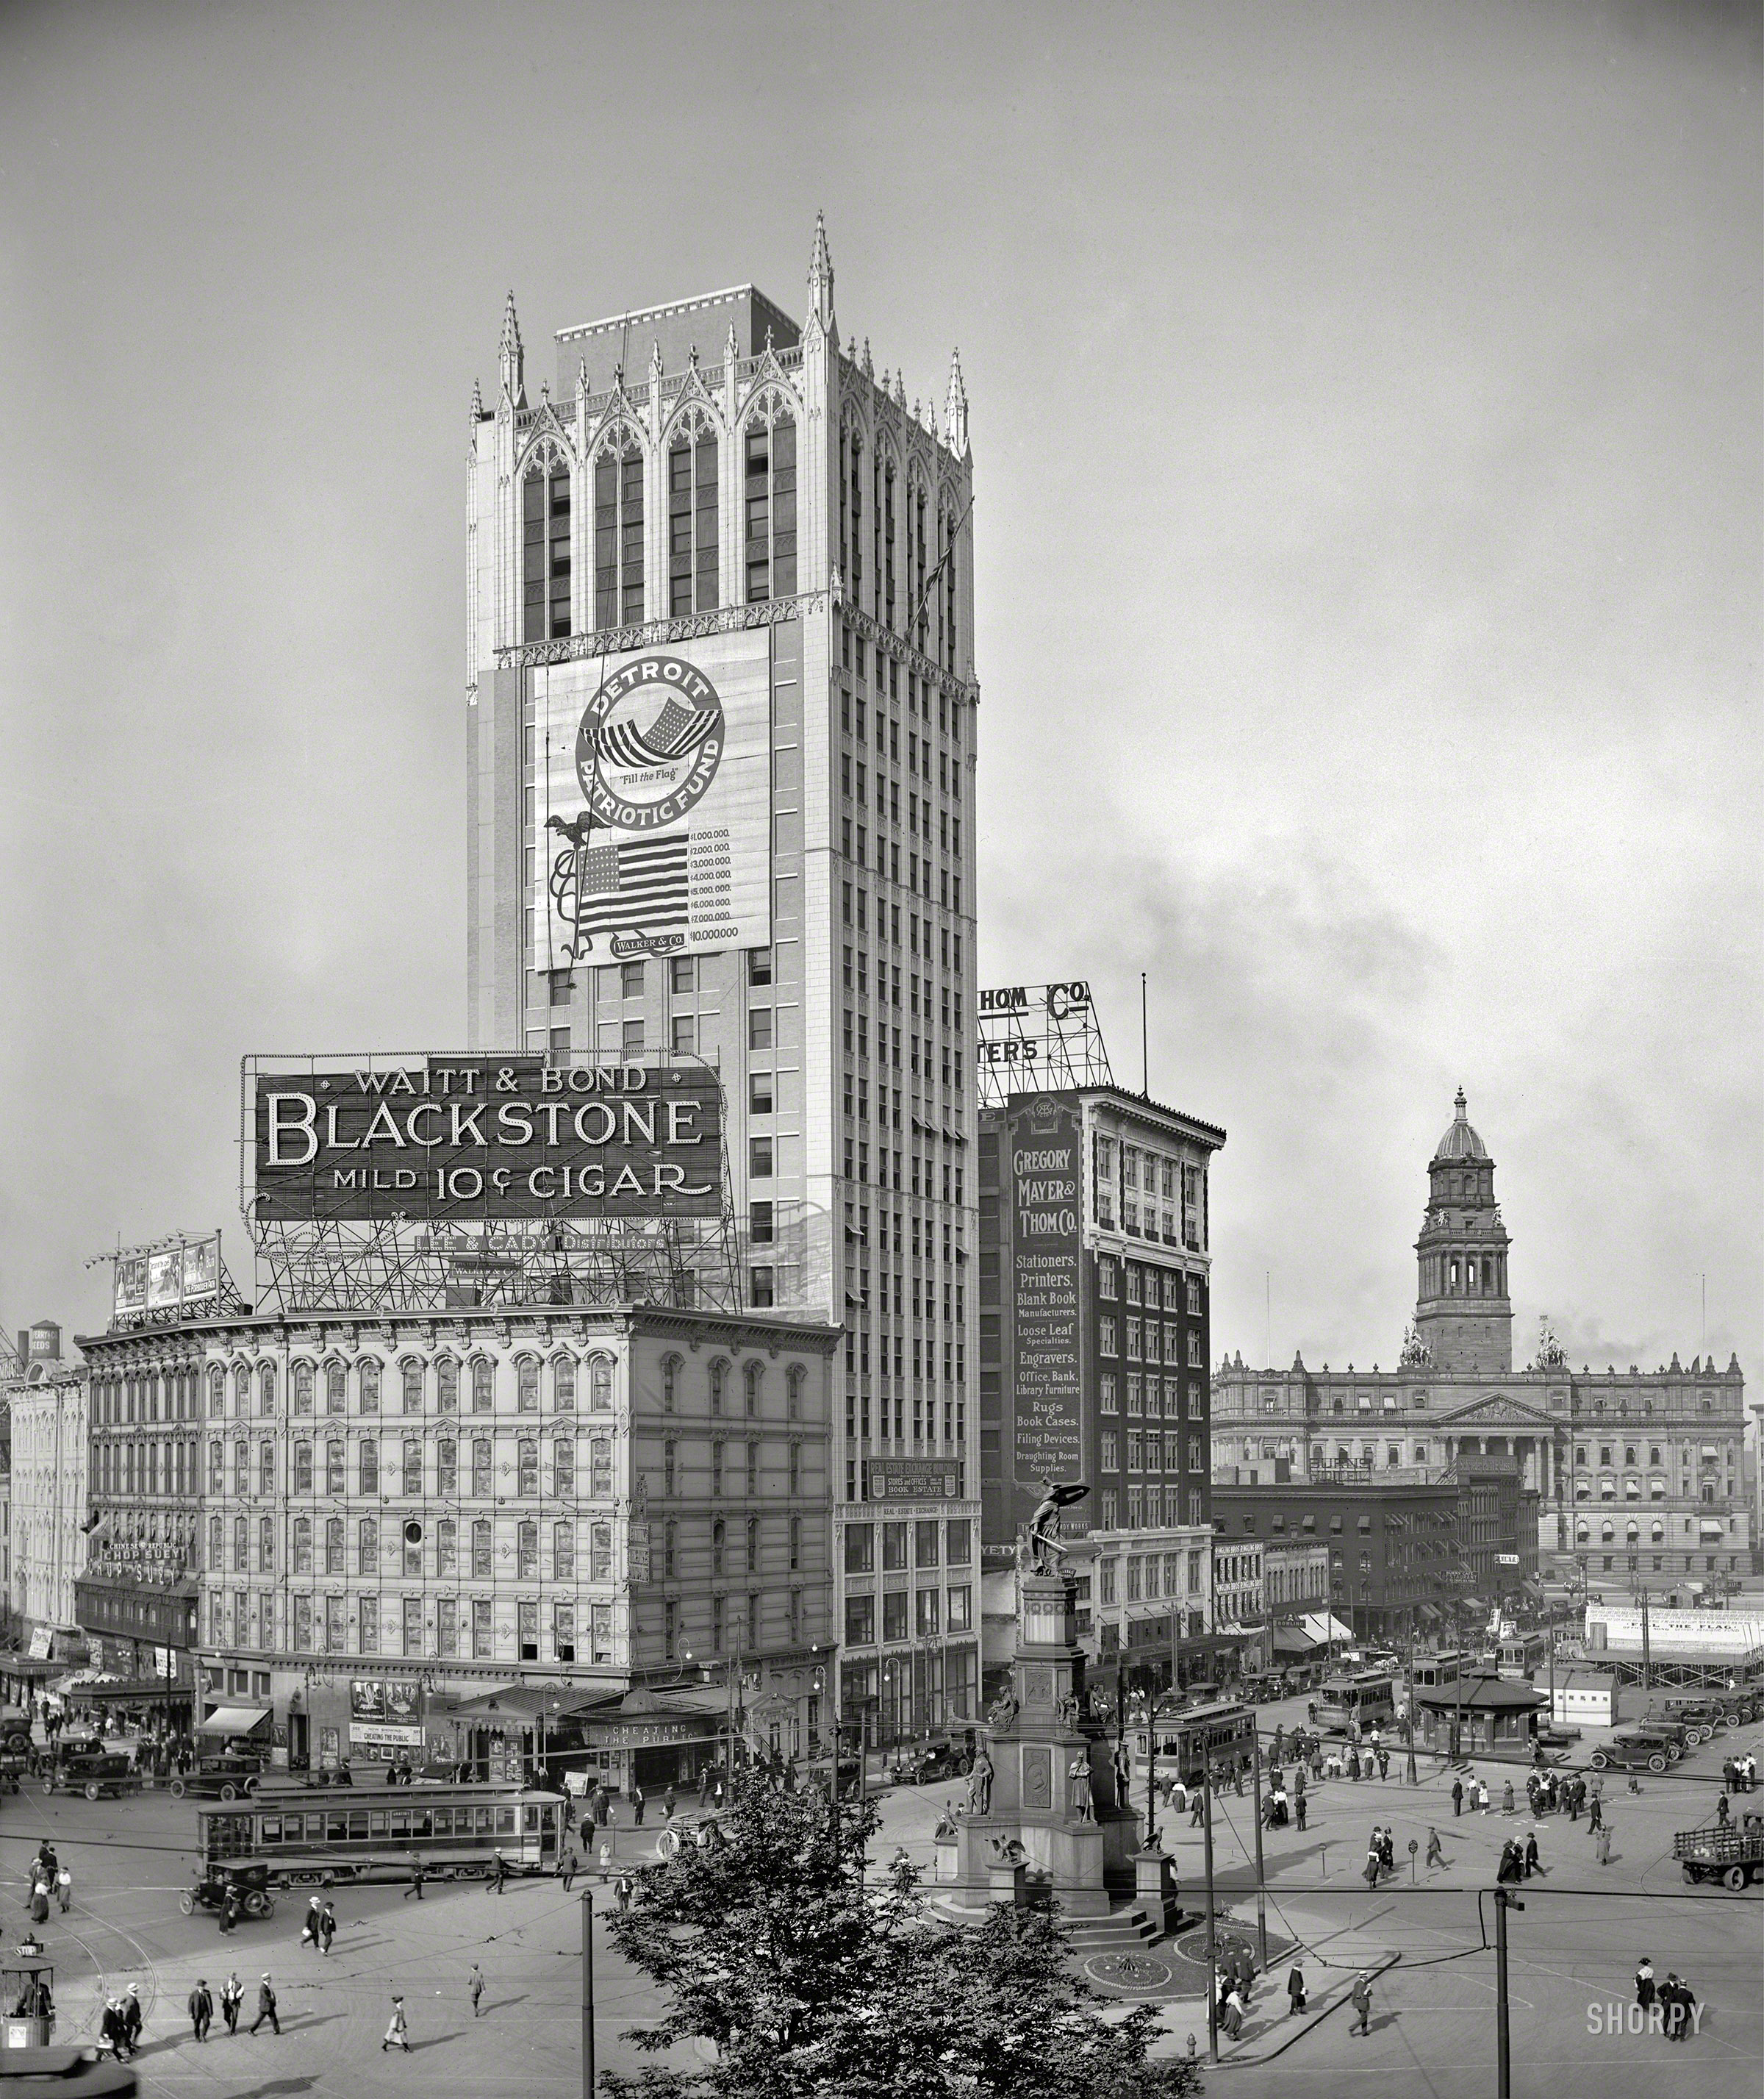 Detroit, 1918. "Cadillac Square and Real Estate Exchange from City Hall." Also a view of the Soldiers' and Sailors' Monument with World War I patriotic signage as the backdrop. Now playing at the corner movie palace: the "cinemelodrama" Cheating the Public. 8x10 inch dry plate glass negative. View full size.